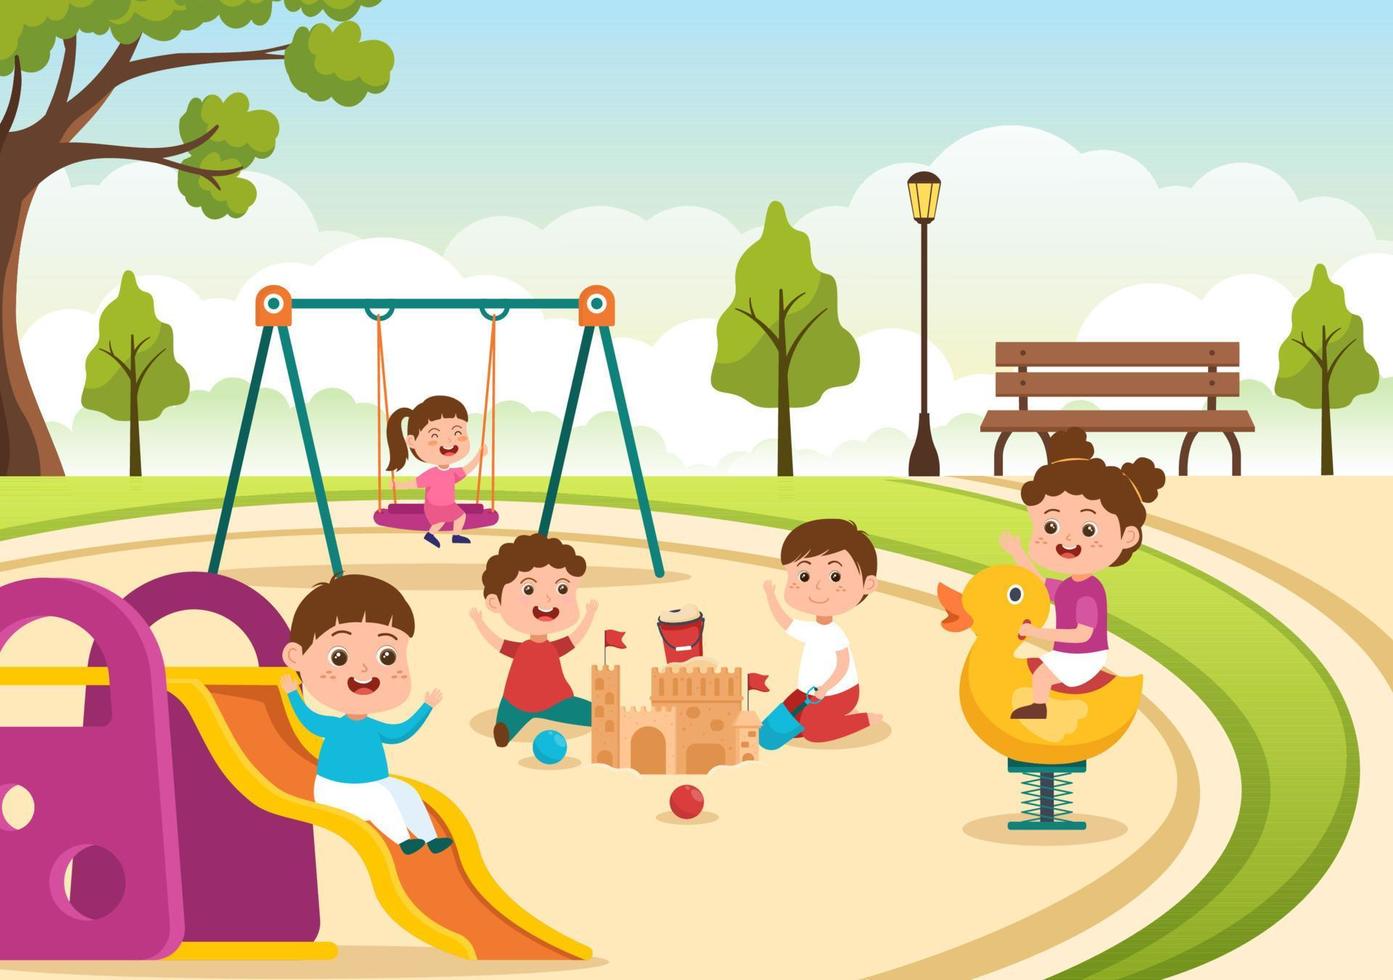 Children Playground with Swings, Slide, Climbing Ladders and More in the Amusement Park for Little Ones to Play in Flat Cartoon Illustration vector